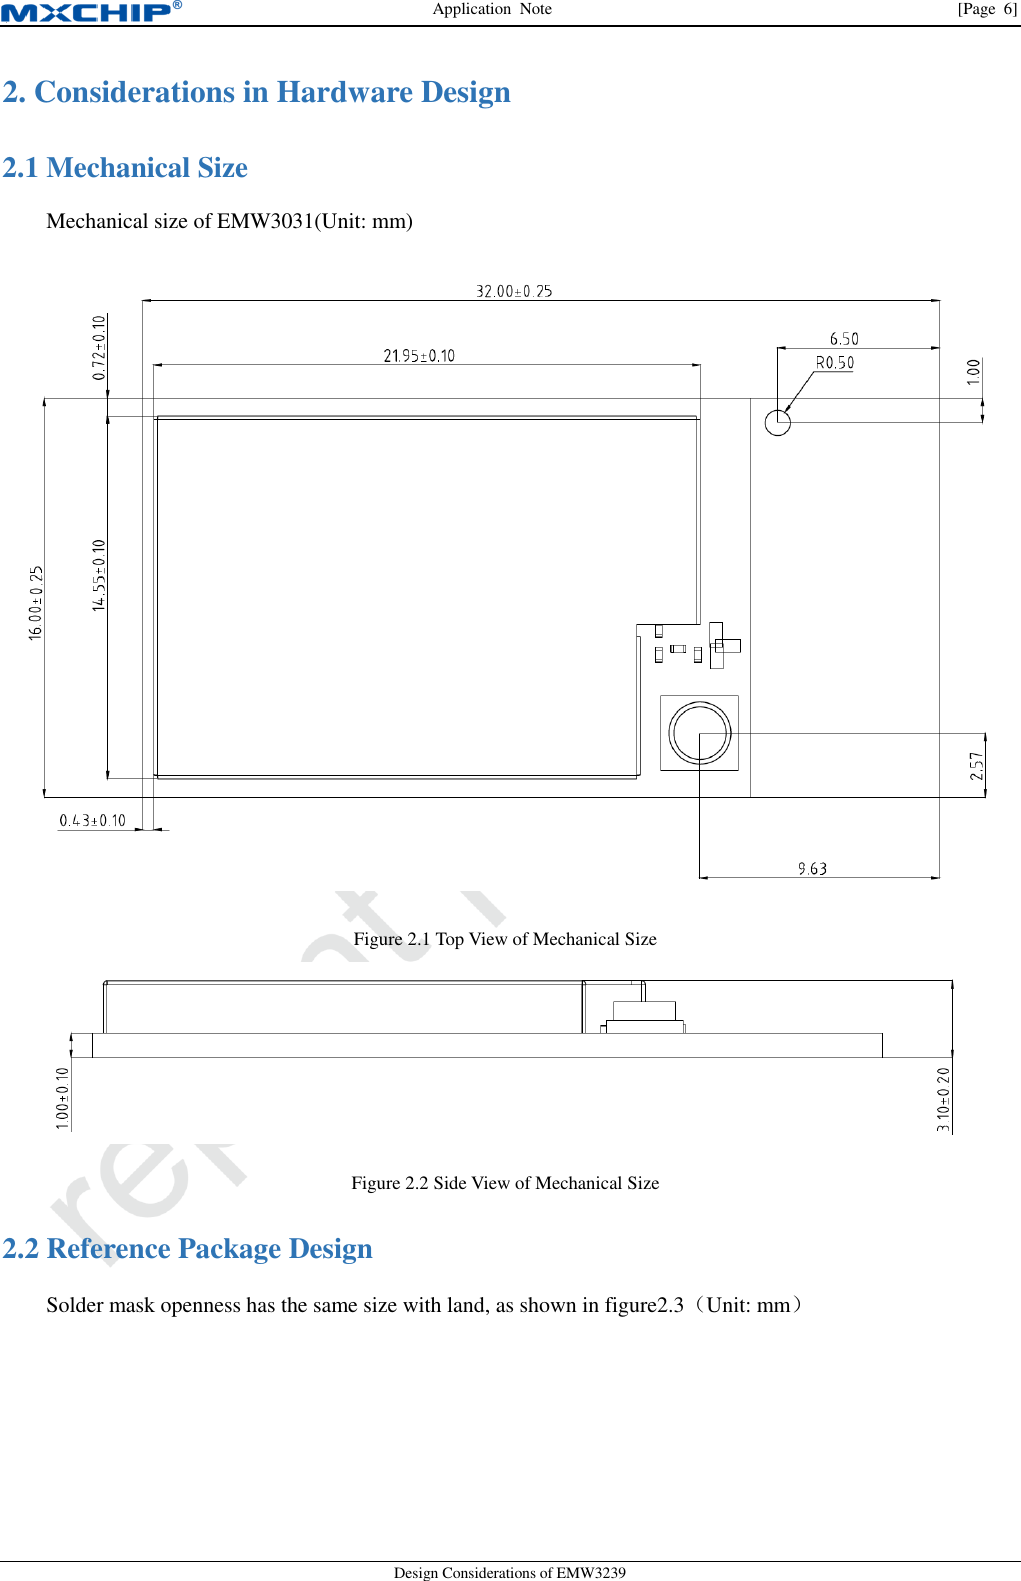 Application  Note                [Page  6] Design Considerations of EMW3239 2. Considerations in Hardware Design  Mechanical Size 2.1Mechanical size of EMW3031(Unit: mm)  Figure 2.1 Top View of Mechanical Size  Figure 2.2 Side View of Mechanical Size  Reference Package Design 2.2Solder mask openness has the same size with land, as shown in figure2.3（Unit: mm） 